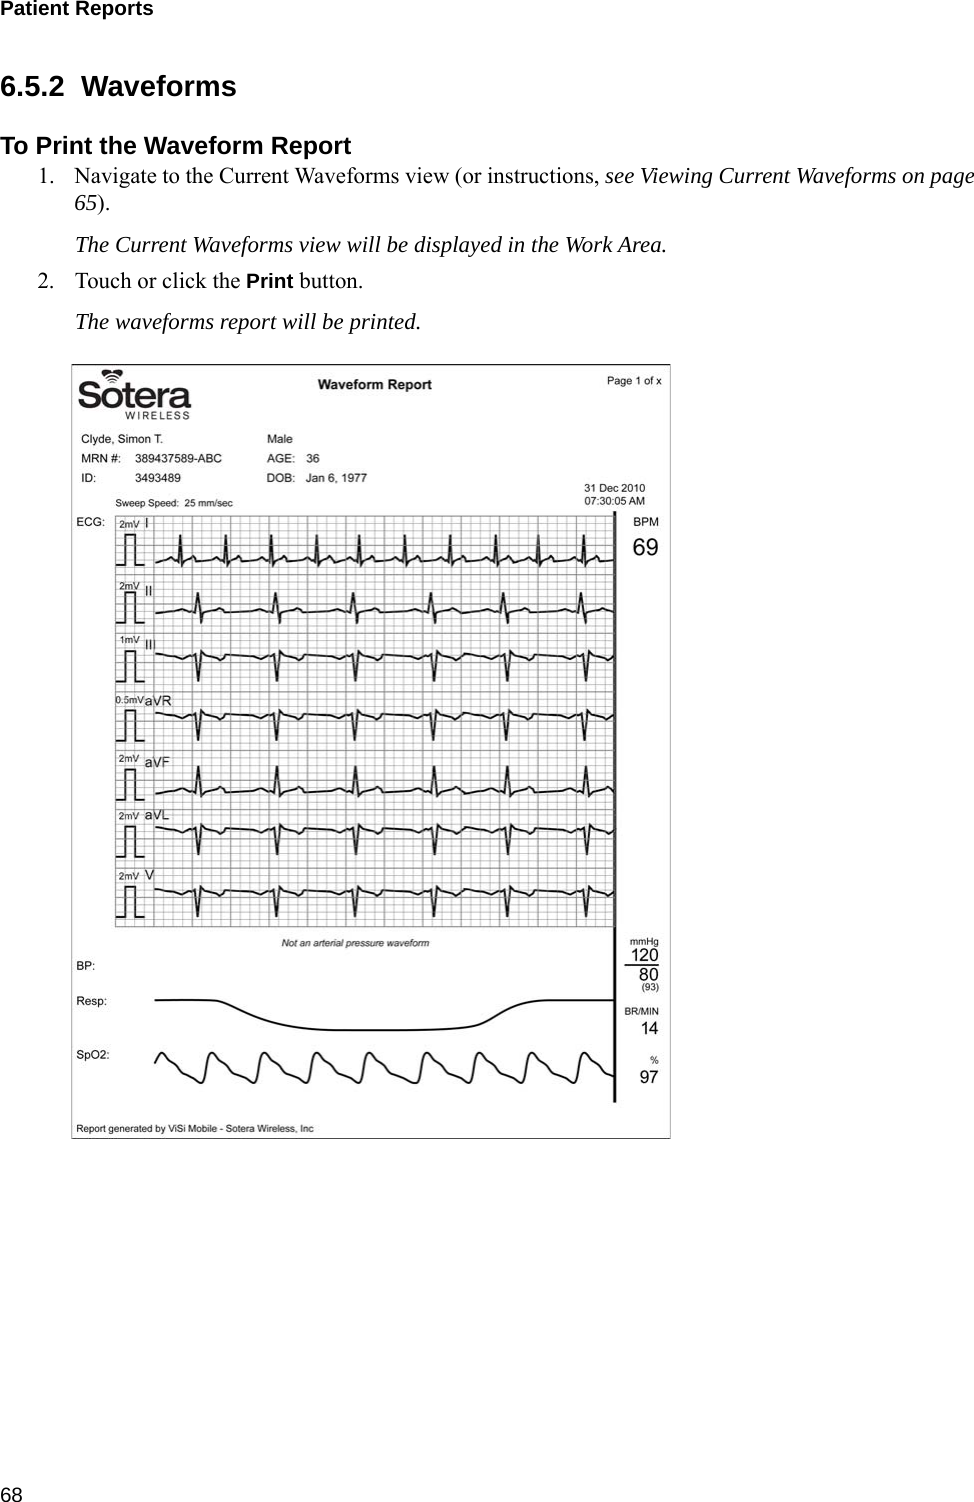 Patient Reports 686.5.2  WaveformsTo Print the Waveform Report1. Navigate to the Current Waveforms view (or instructions, see Viewing Current Waveforms on page65).The Current Waveforms view will be displayed in the Work Area.2. Touch or click the Print button.The waveforms report will be printed.